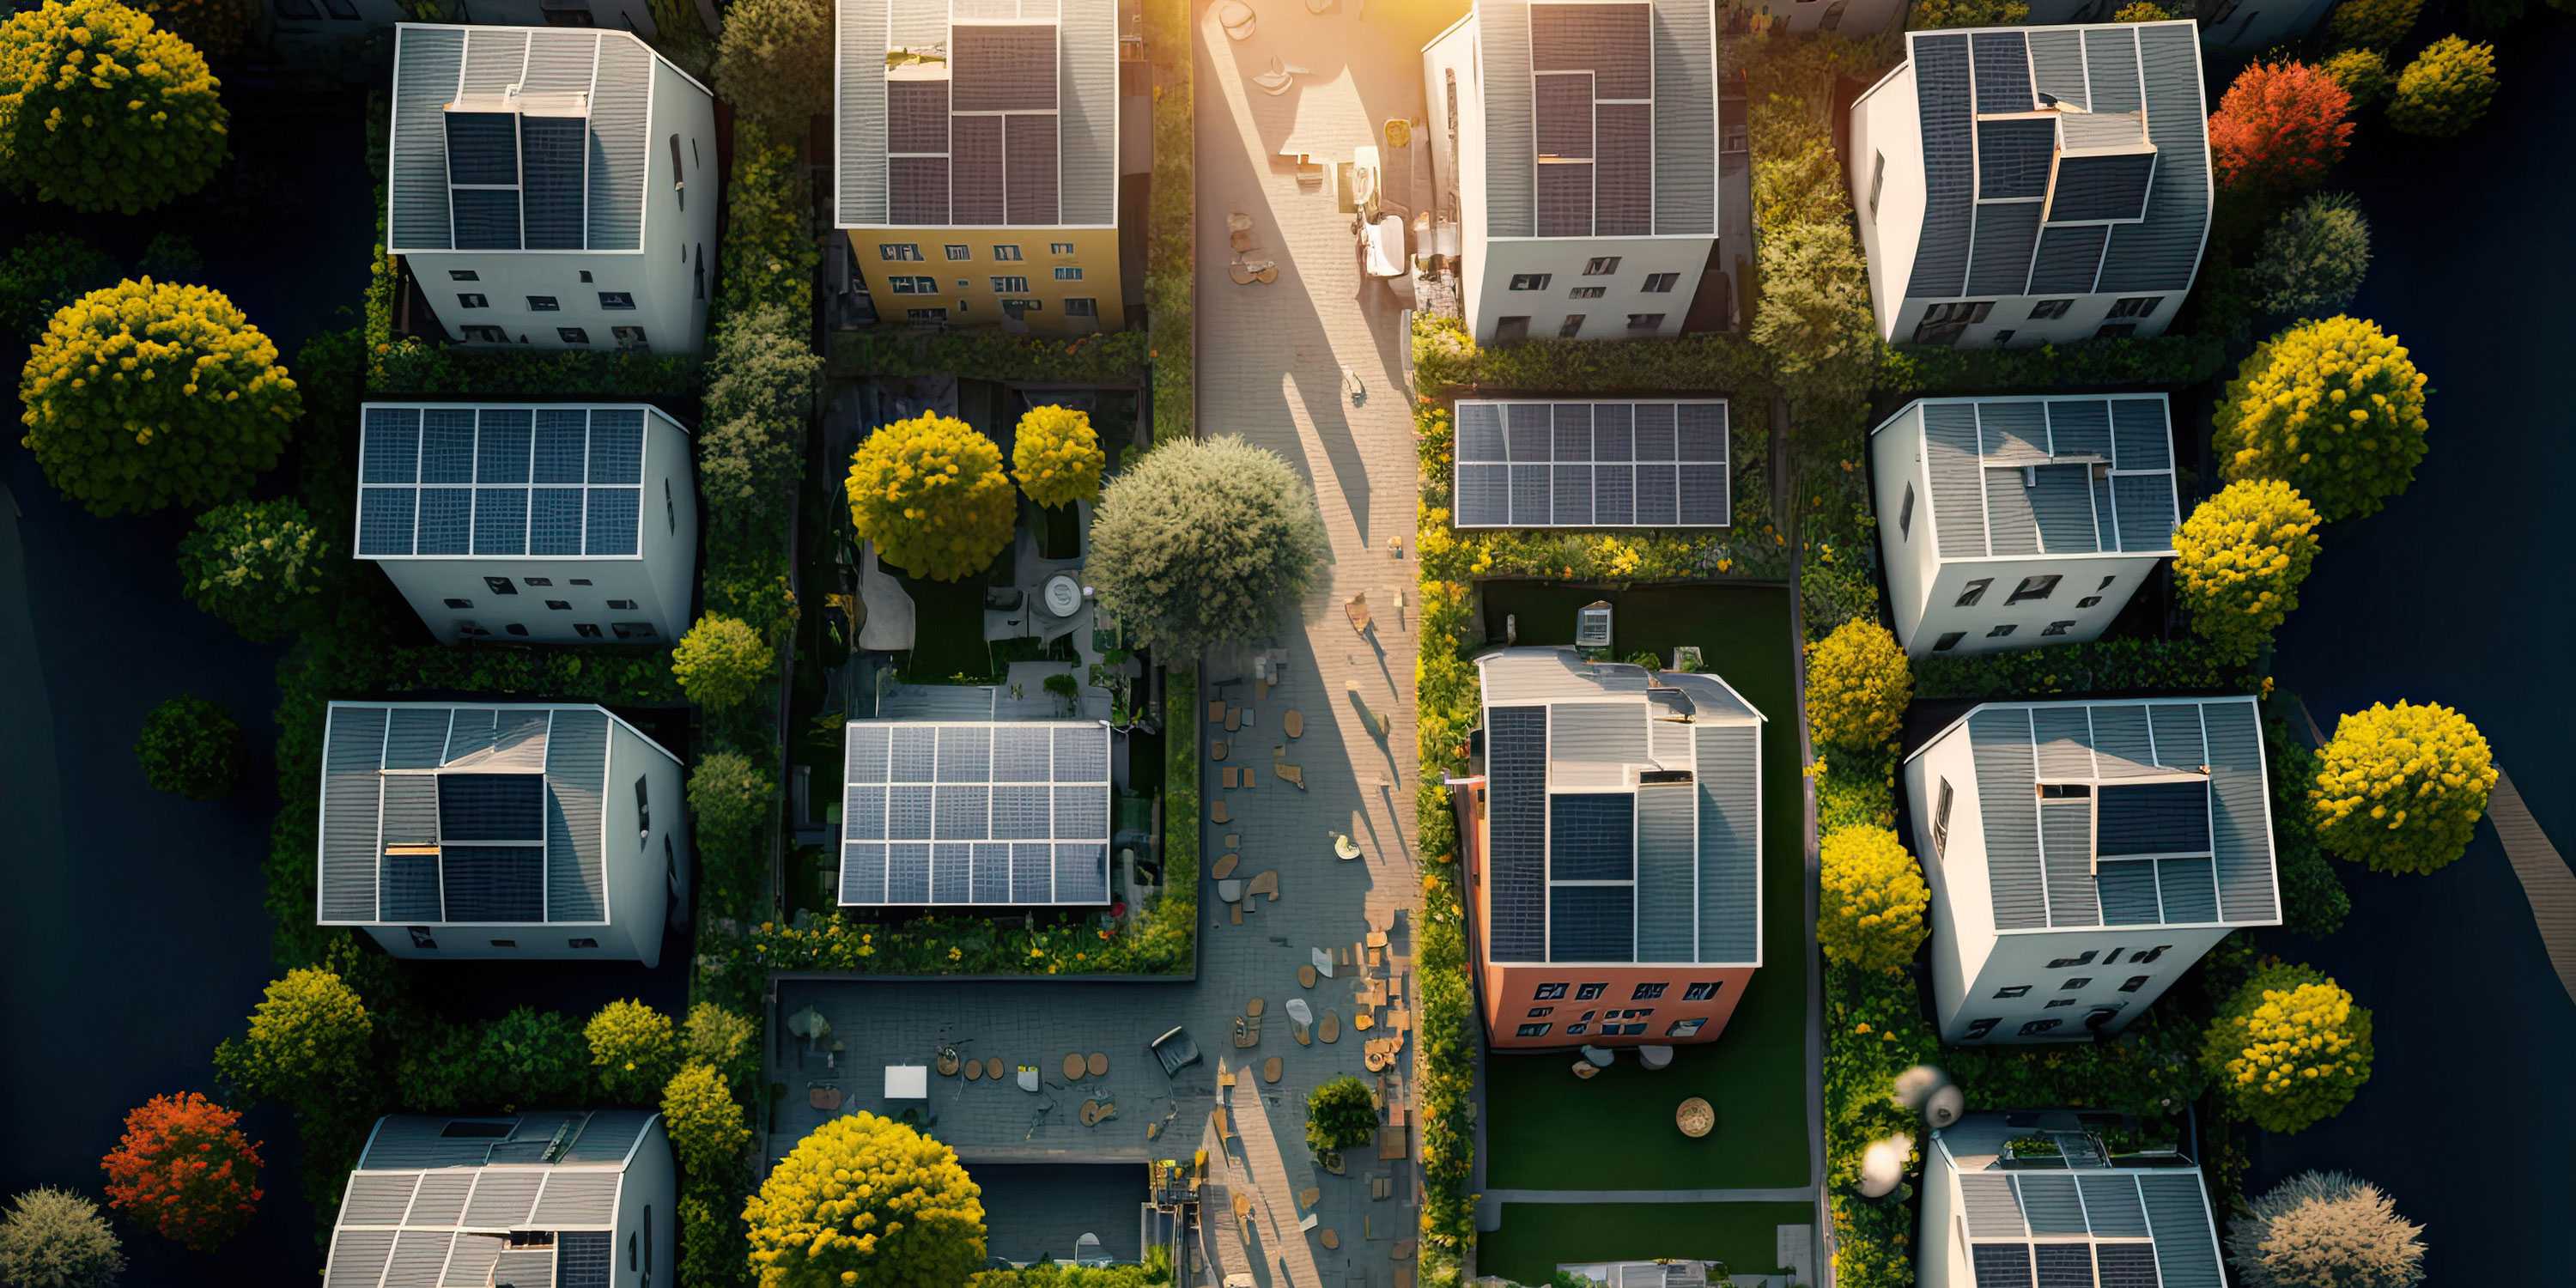 Bird's eye view of the housing estate, solar panels on the roofs of the houses.